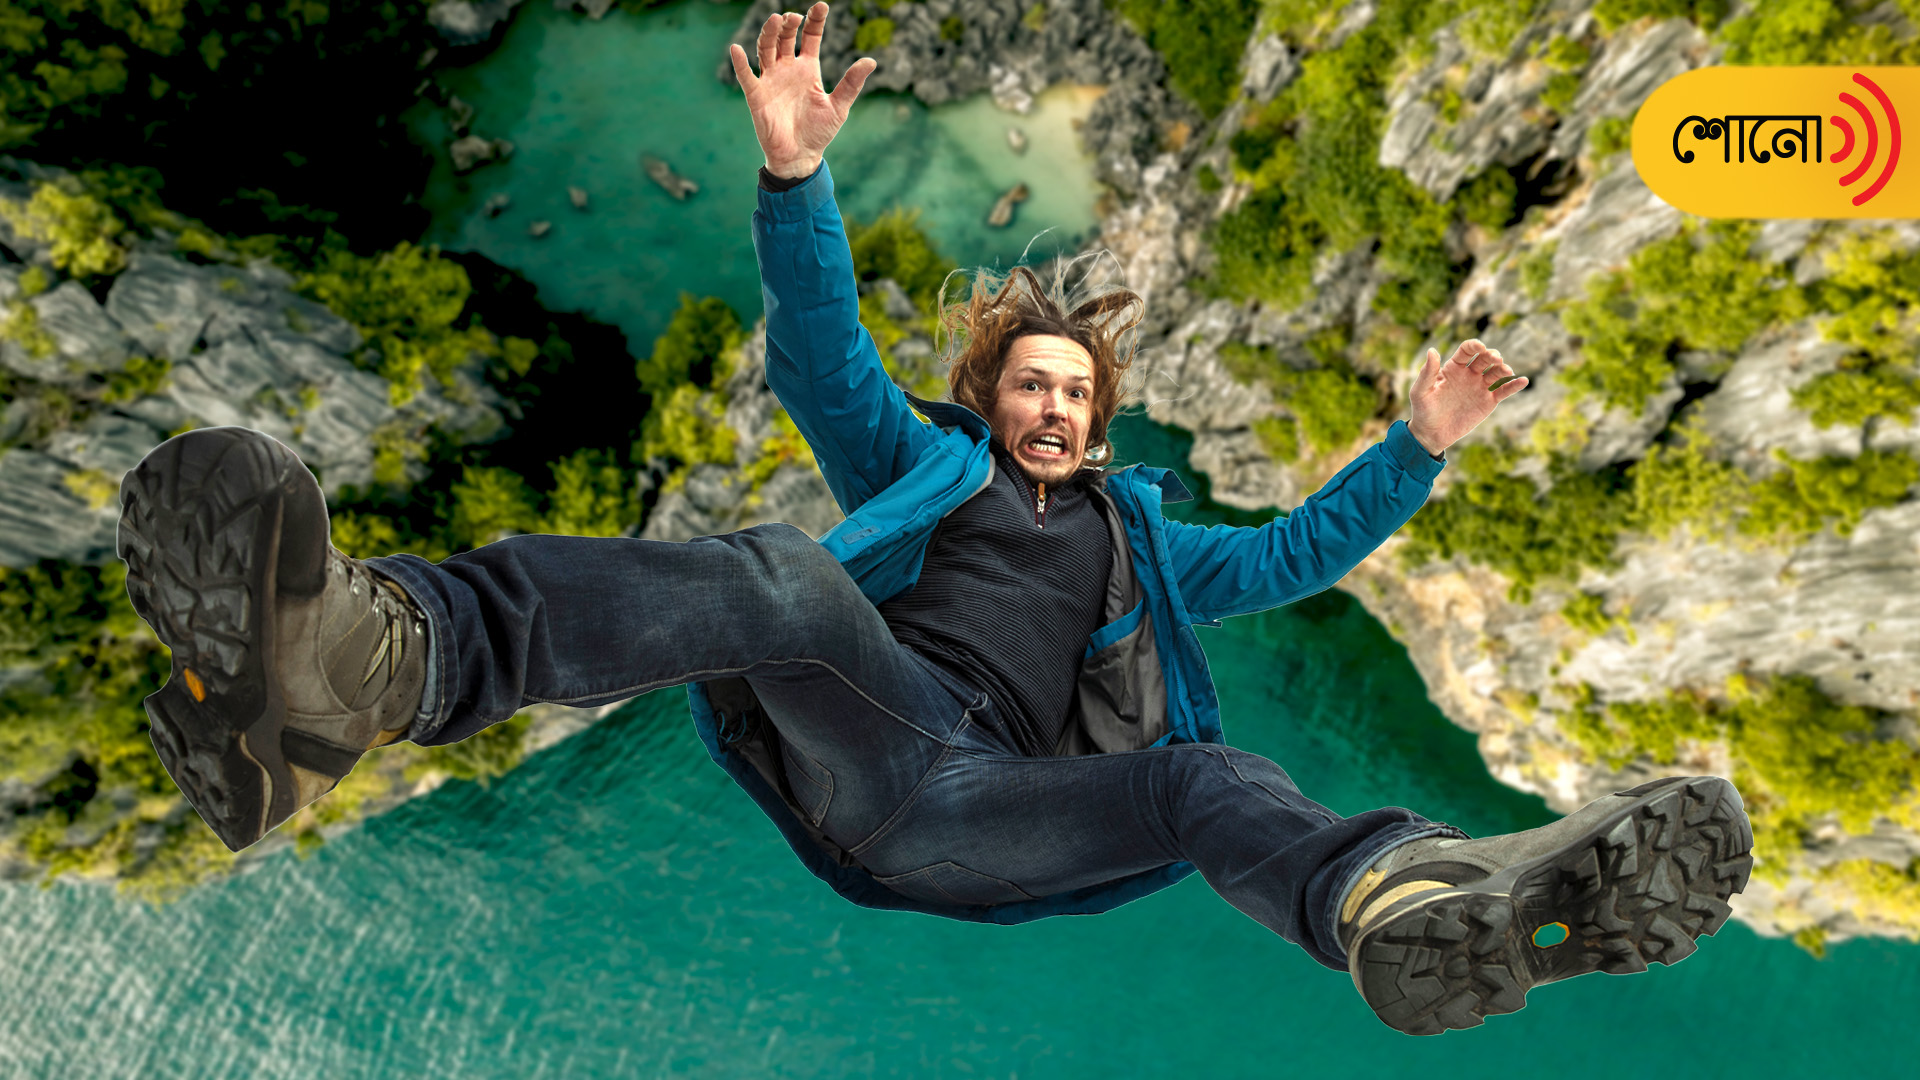 Man 'miraculously' survives 2,000 feet fall with minor injuries in New Zealand